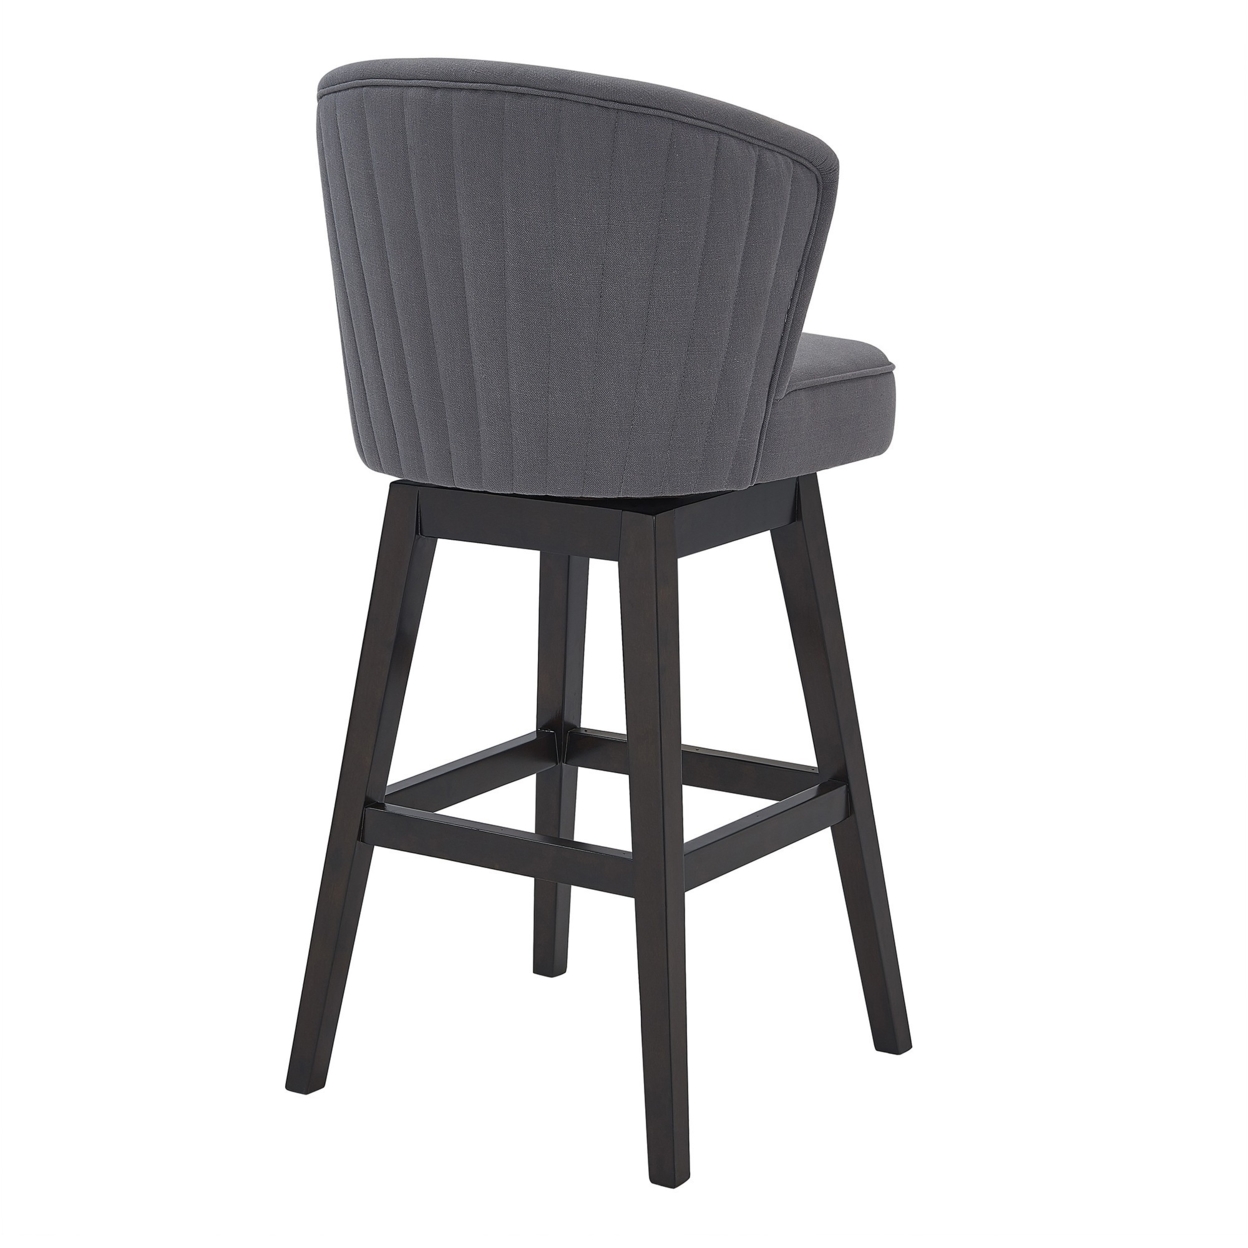 30 Inches Padded Swivel Barstool With Curved Backrest, Gray- Saltoro Sherpi